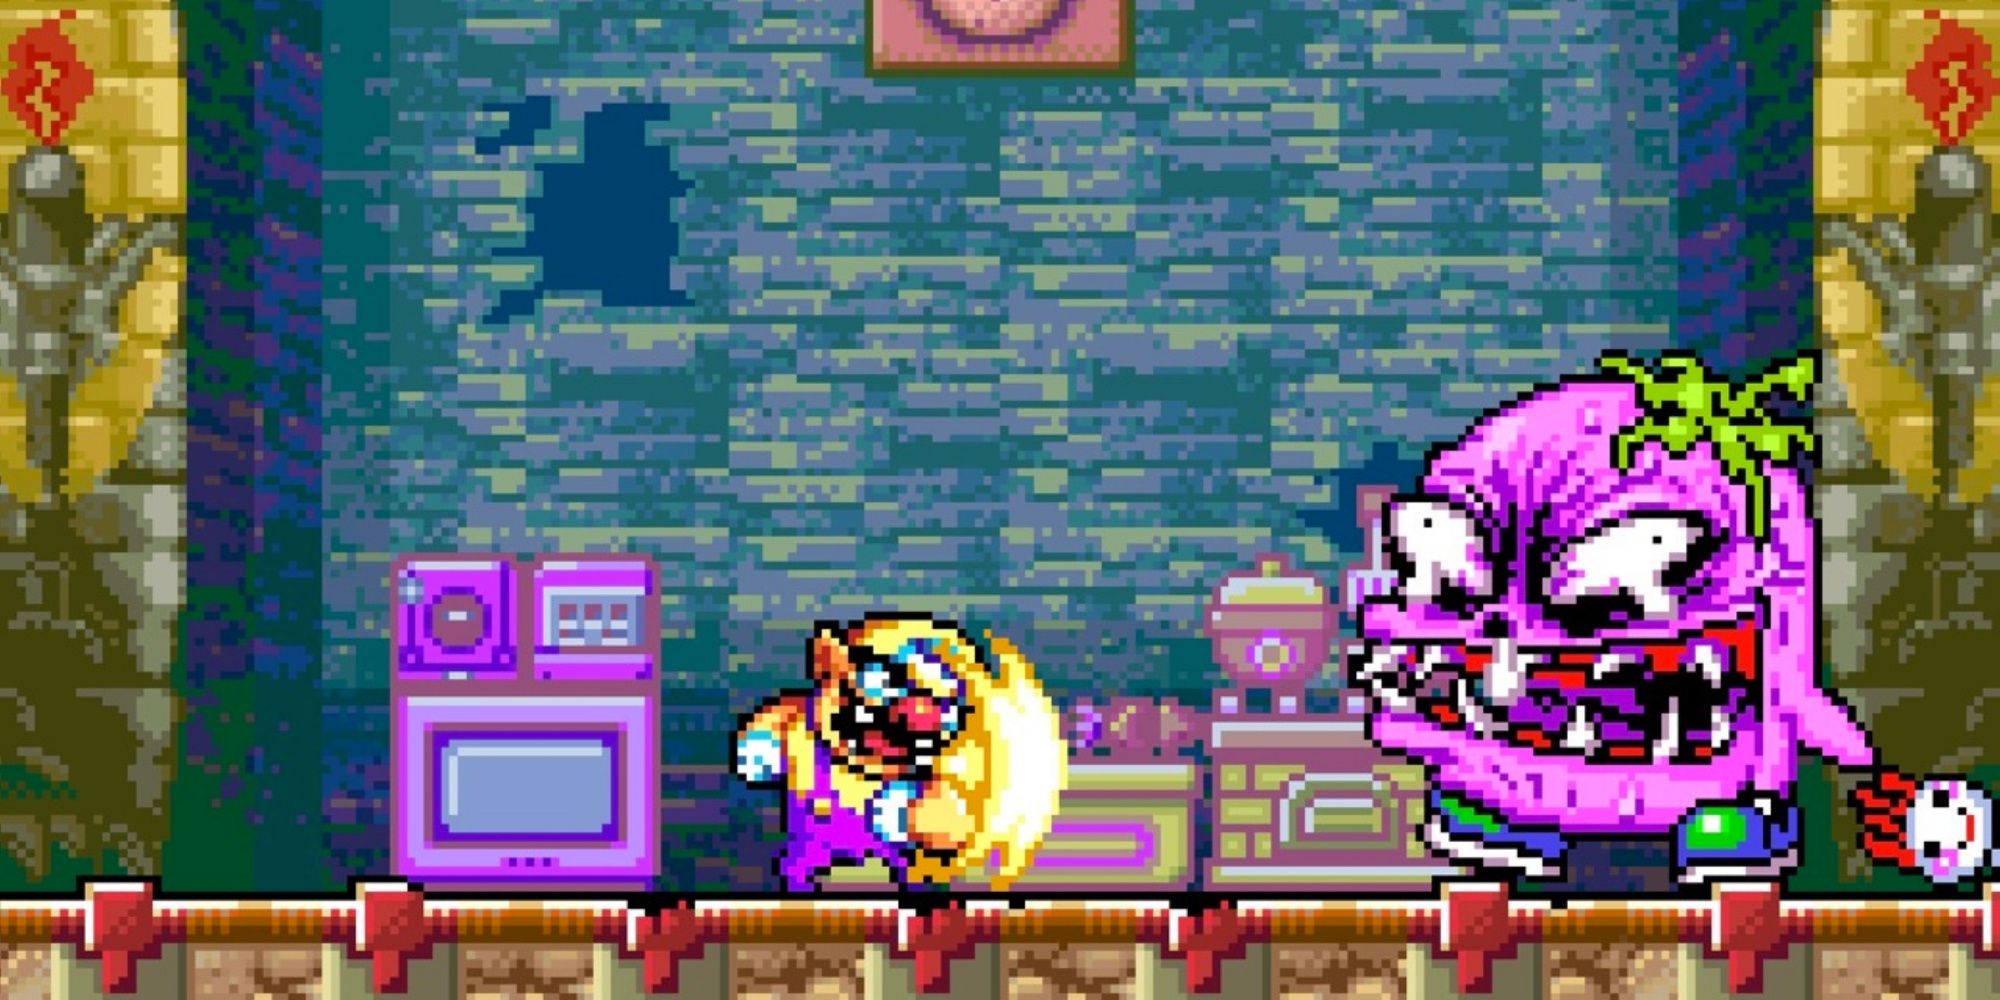 Fighting a boss in Wario Land 4